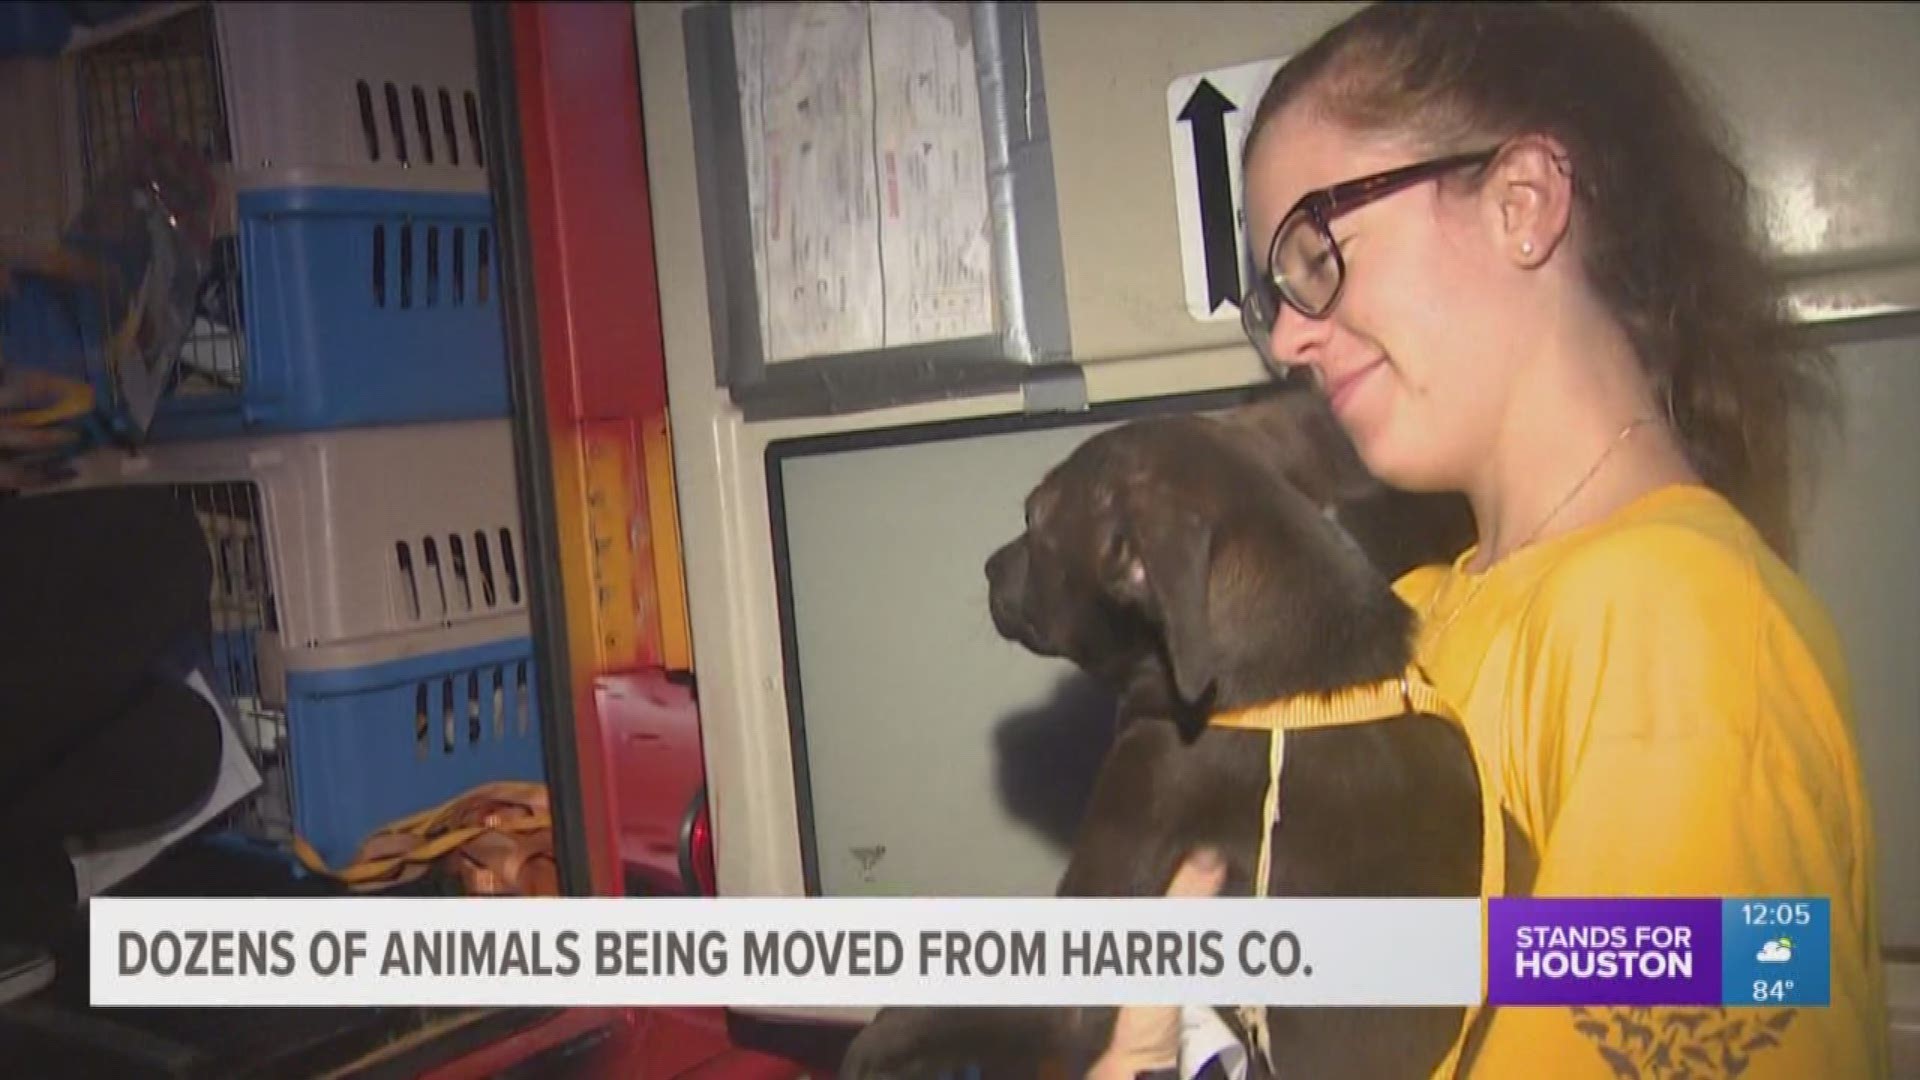 Dozens of dogs and cats from the Harris County Animal Shelter took off on a bus bound for Oklahoma Thursday morning, headed for the Humane Society of Tulsa and other shelters in hopes of finding forever homes.